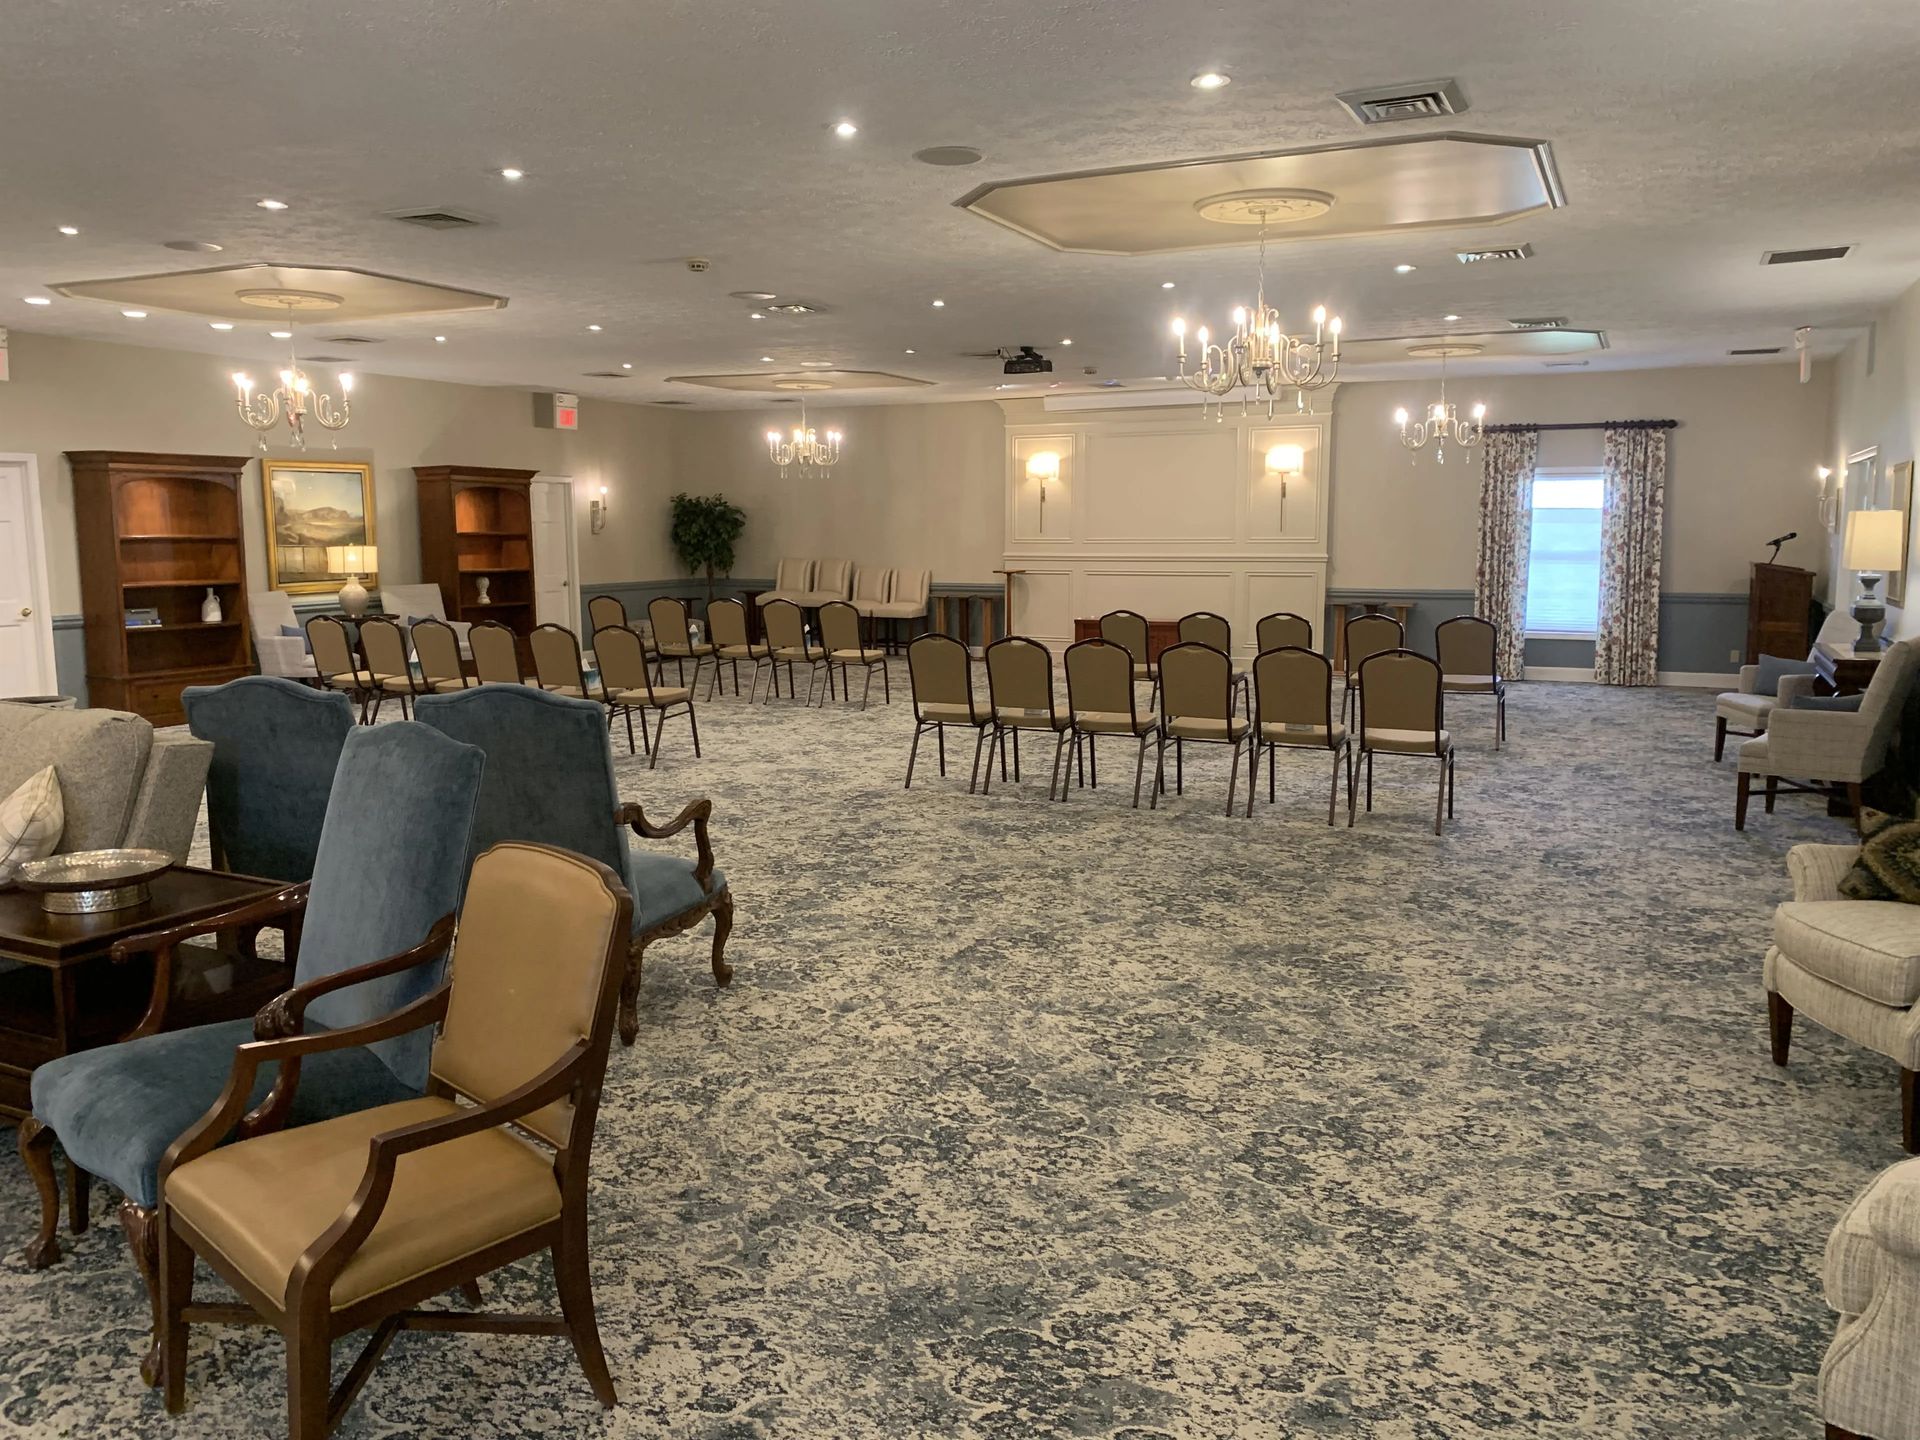 a large room with a lot of chairs and tables in it .